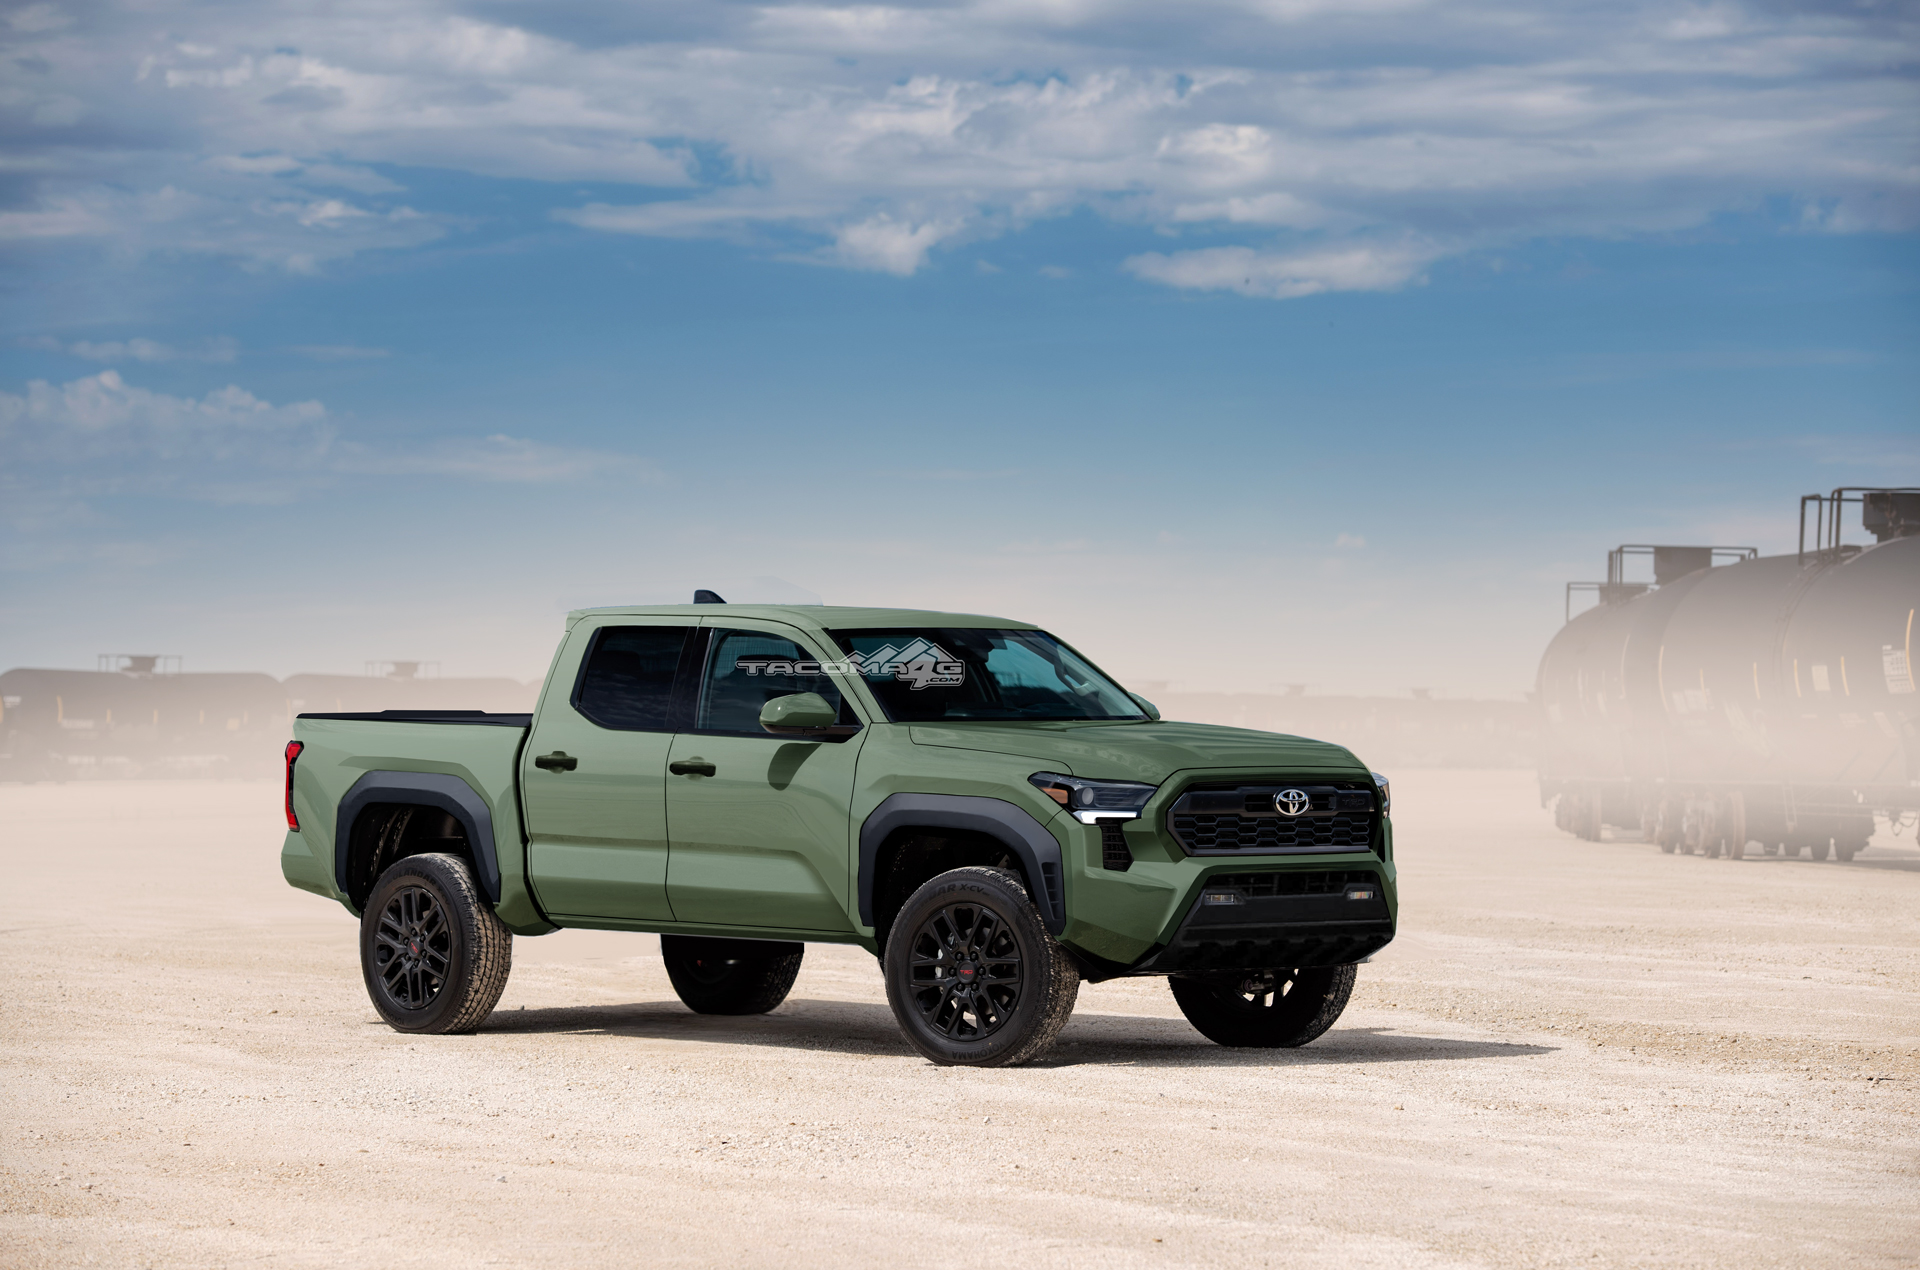 2024 Tacoma Our 2024 Toyota Tacoma TRD PRO Preview Renderings! Tacoma-2023-front-Green